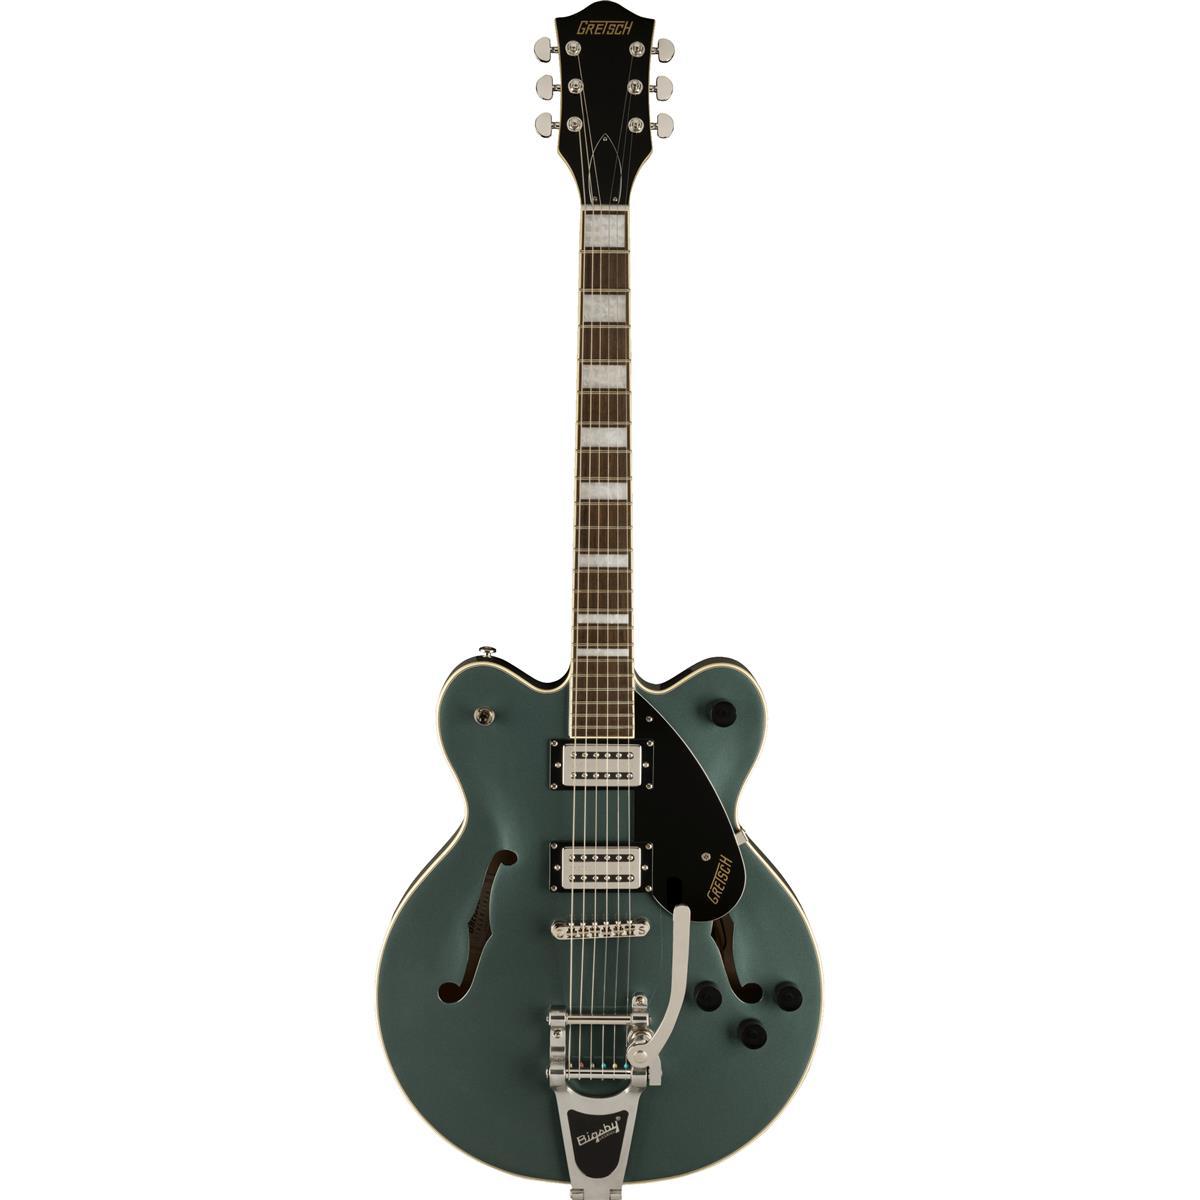 Gretsch G2622T Streamliner Center Bigsby Electric Guitar for $279 Shipped